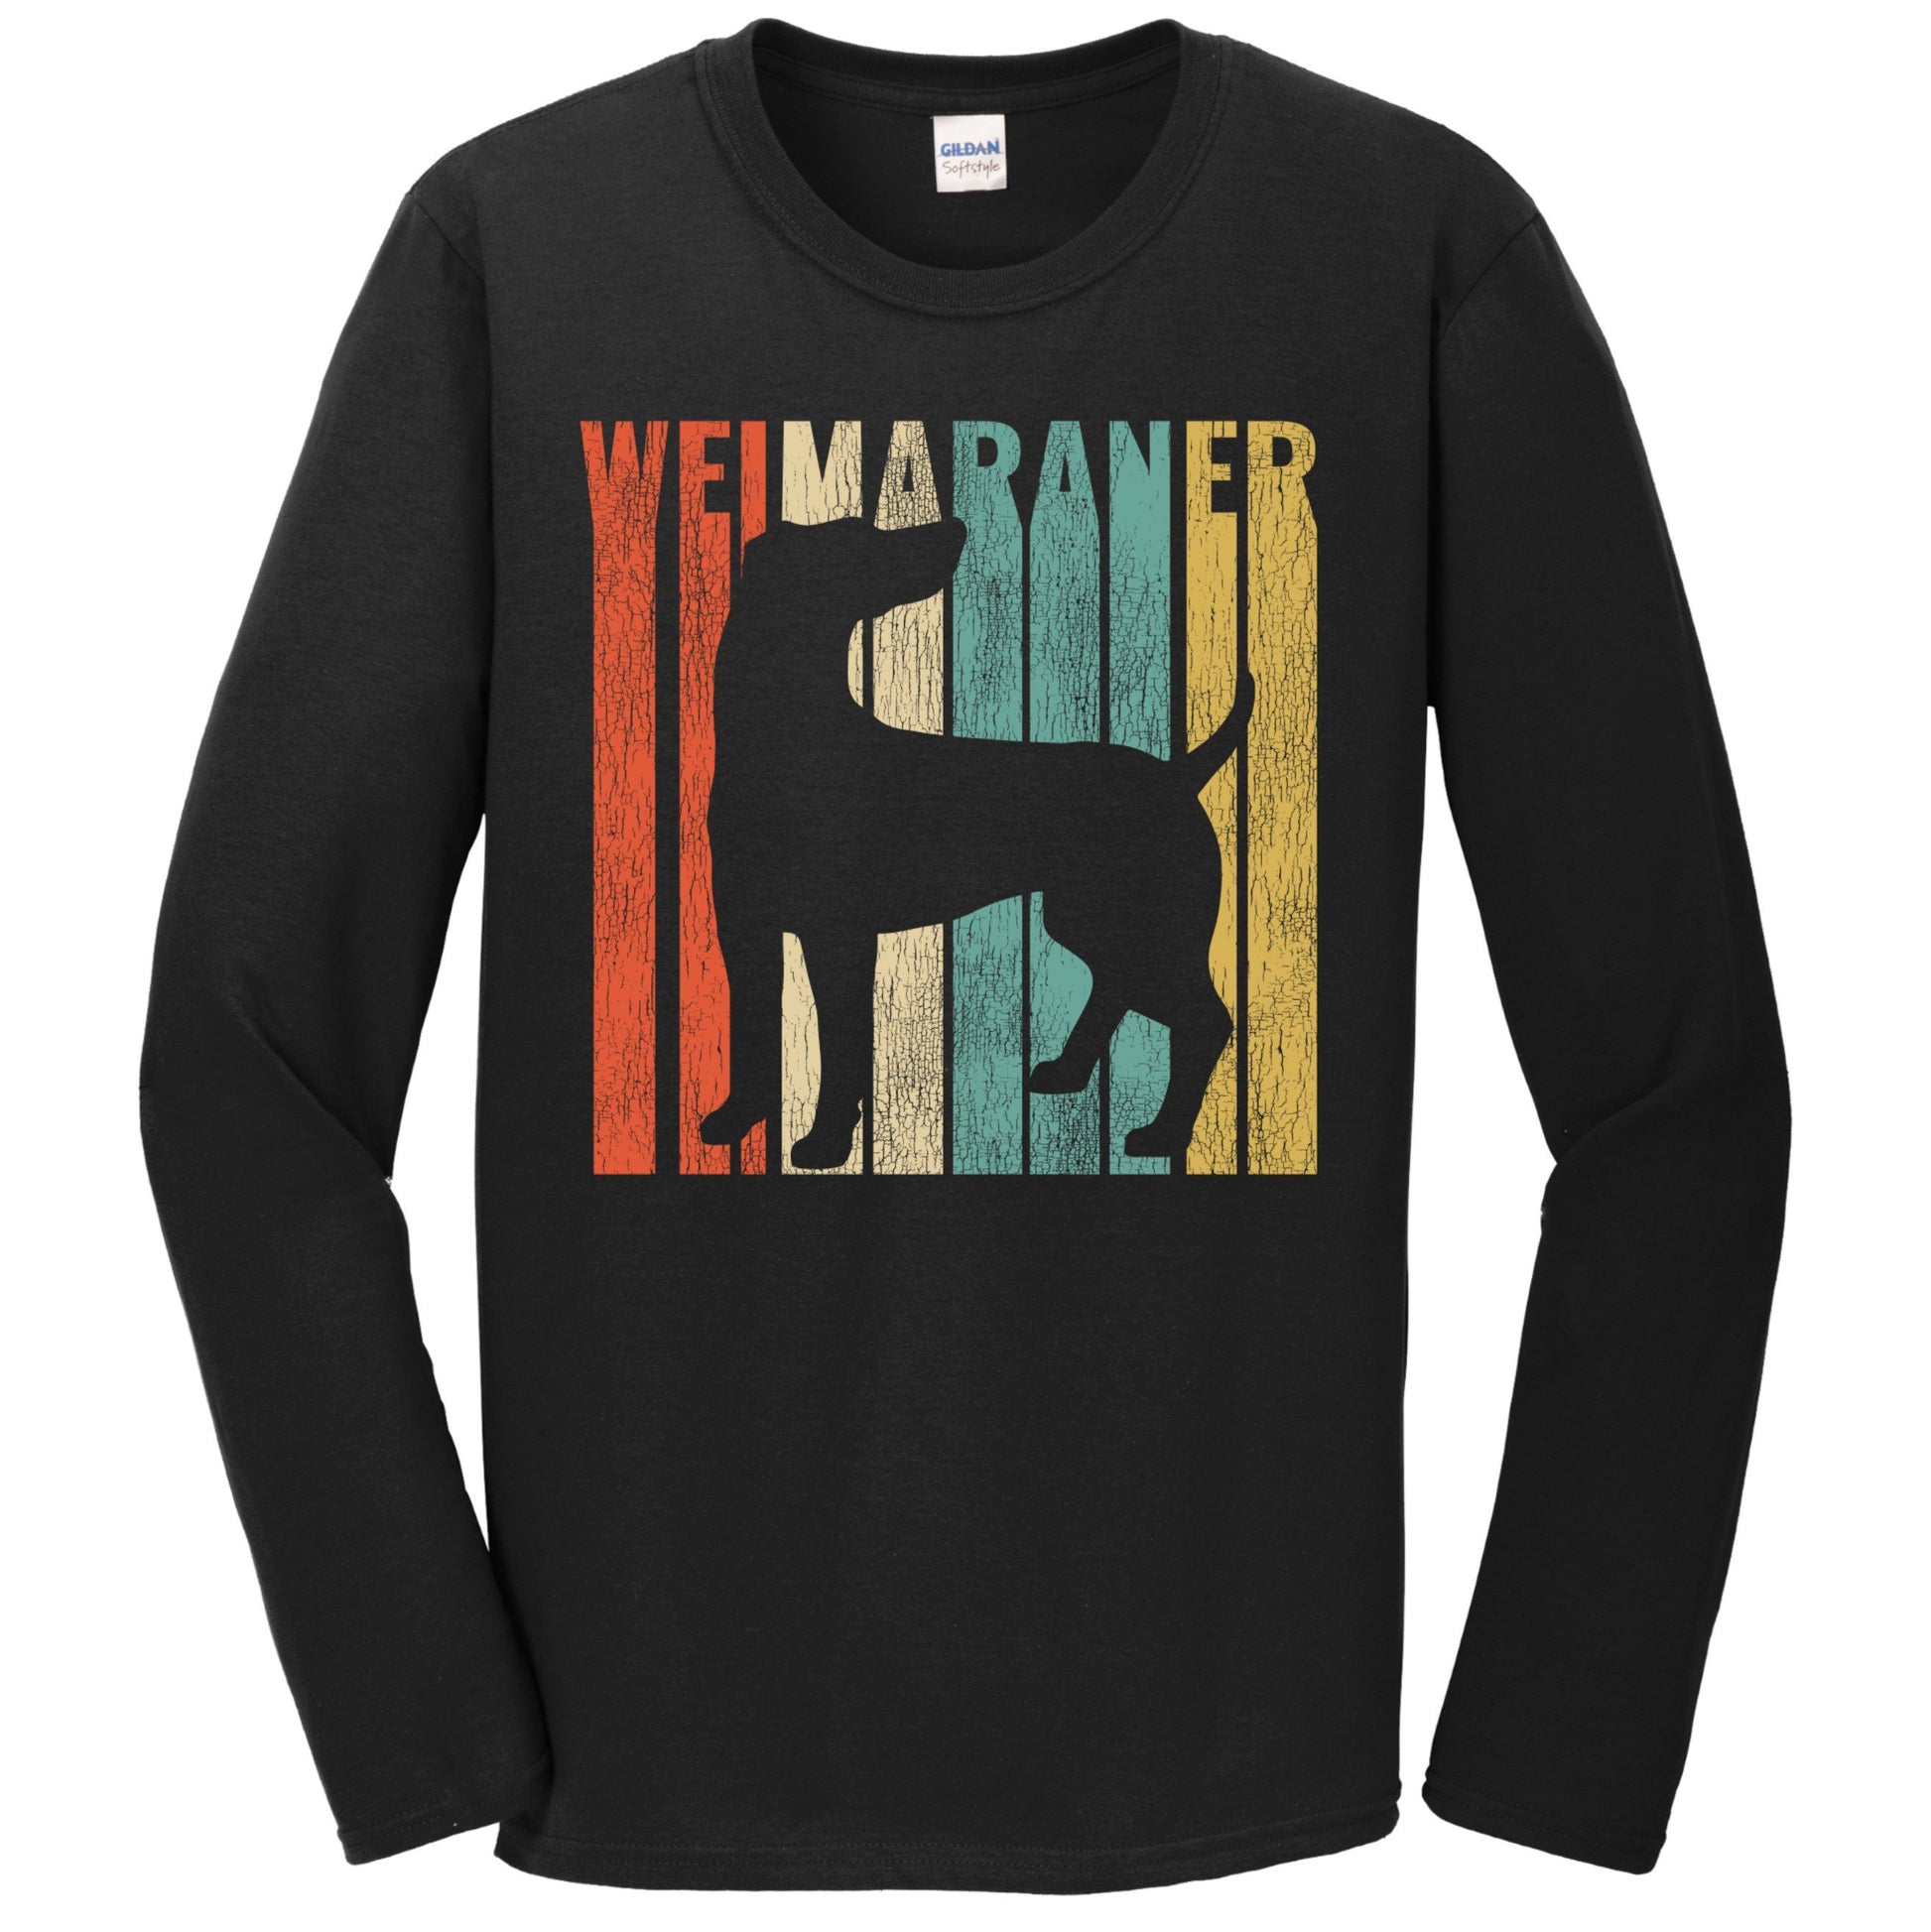 Retro 1970's Style Weimaraner Dog Silhouette Cracked Distressed Long Sleeve T-Shirt